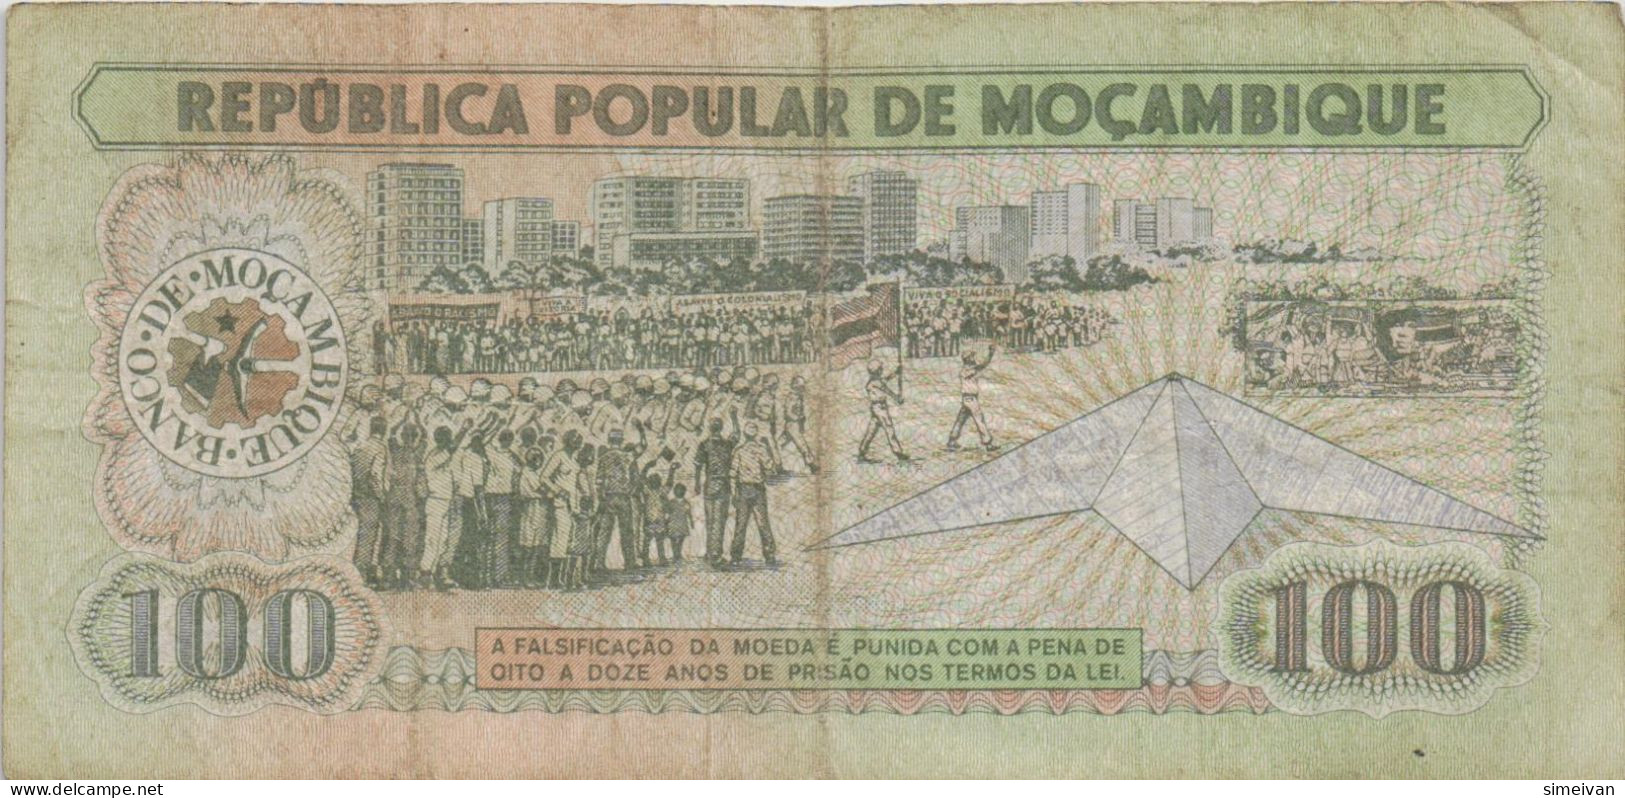 Mozambique 100 Meticais 1980 P-126 Banknote Africa Currency Mosambik #5139 - Mozambique